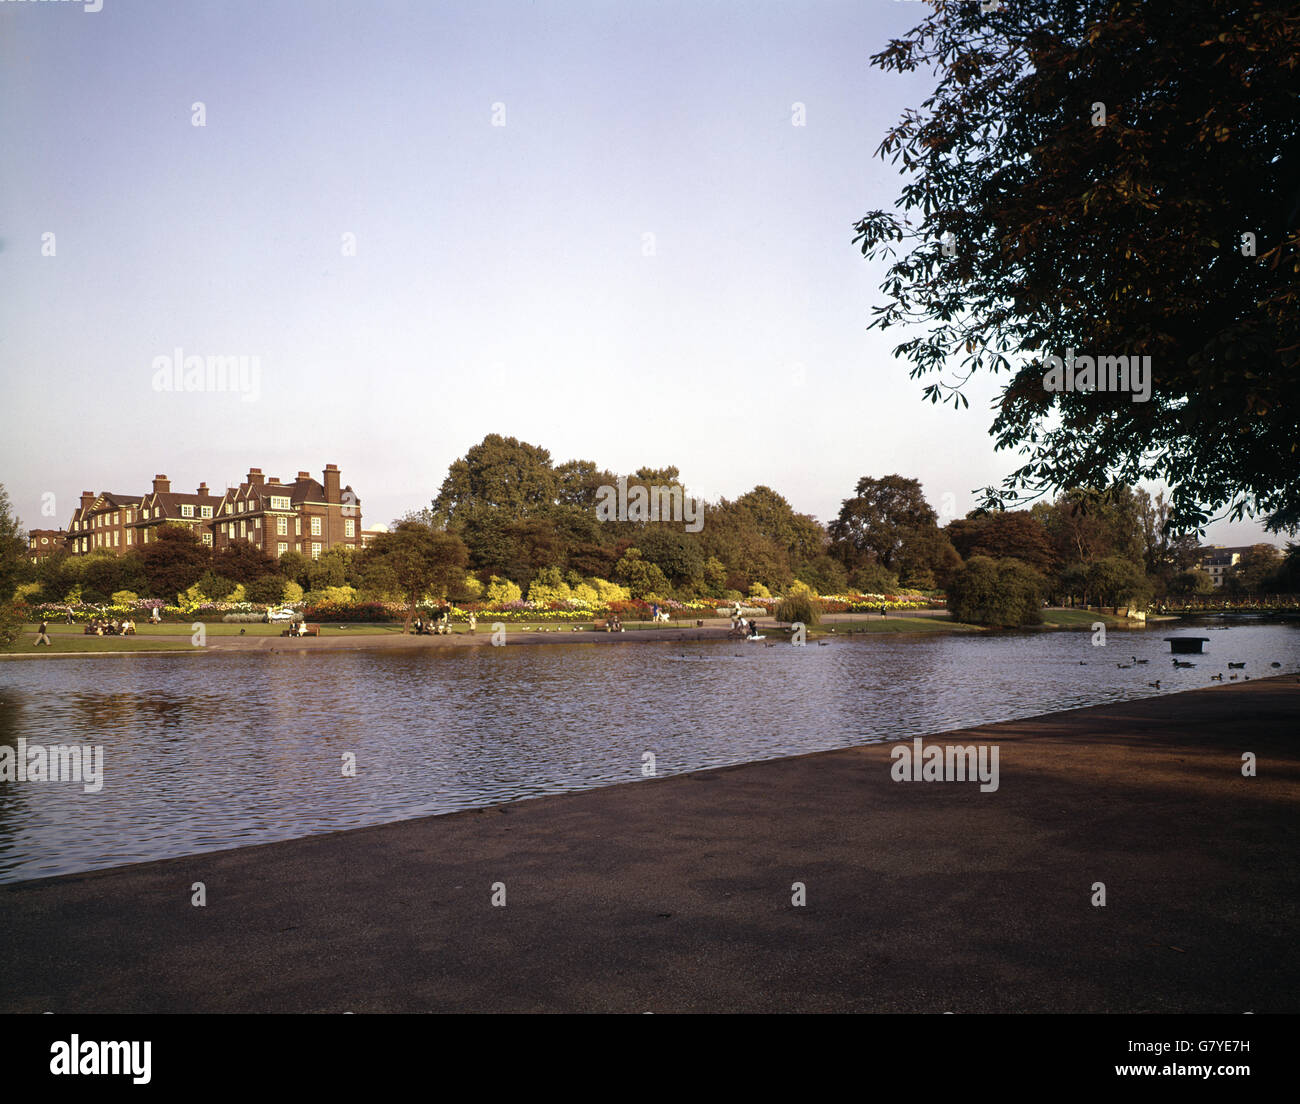 London Scenes - Regent's Park. Picture shows Regent's College from across the boating lake at Regent's Park. Stock Photo